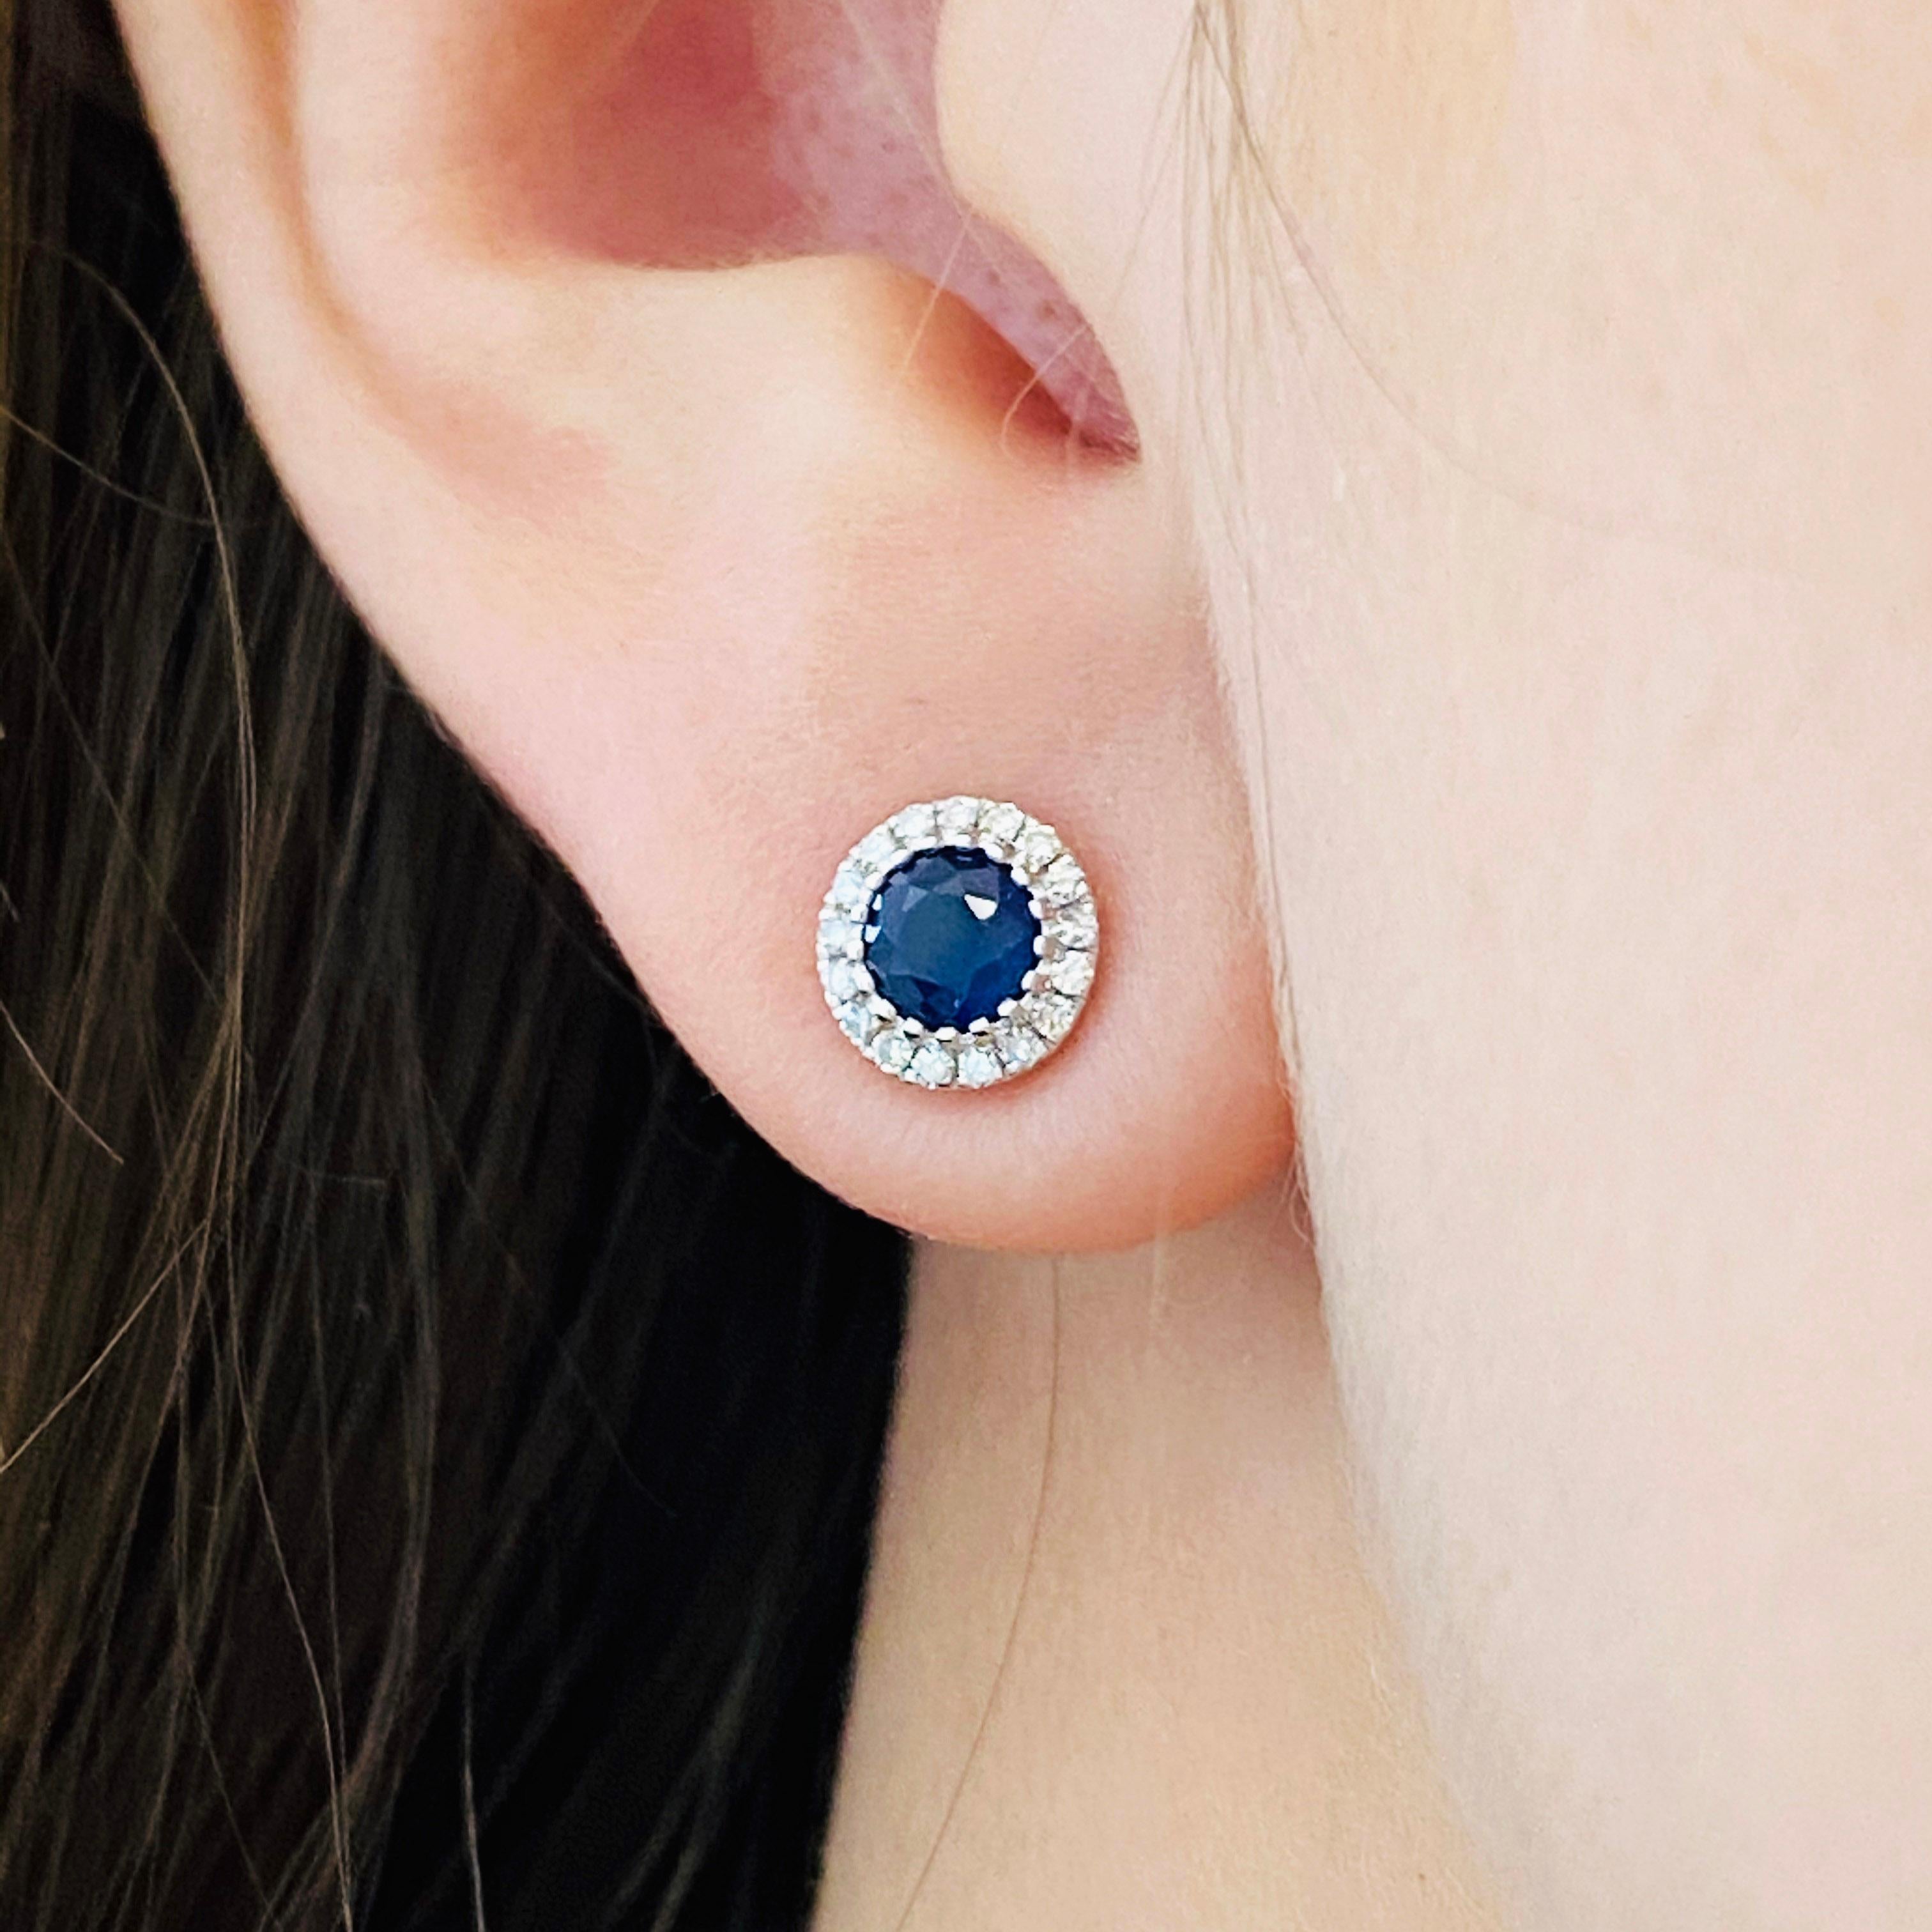 INCREDIBLE SAPPHIRE AND DIAMOND EARRINGS w diamond halo around:
14kt White Gold
.70 CT Blue Sapphire Total Weight
.11 CT White Diamond Total Weight (SI1 clarity and G color)
Earring Diameter: 6.43mm/.25in
Sapphire Diameter: 4.91mm/.19in
Weight Per